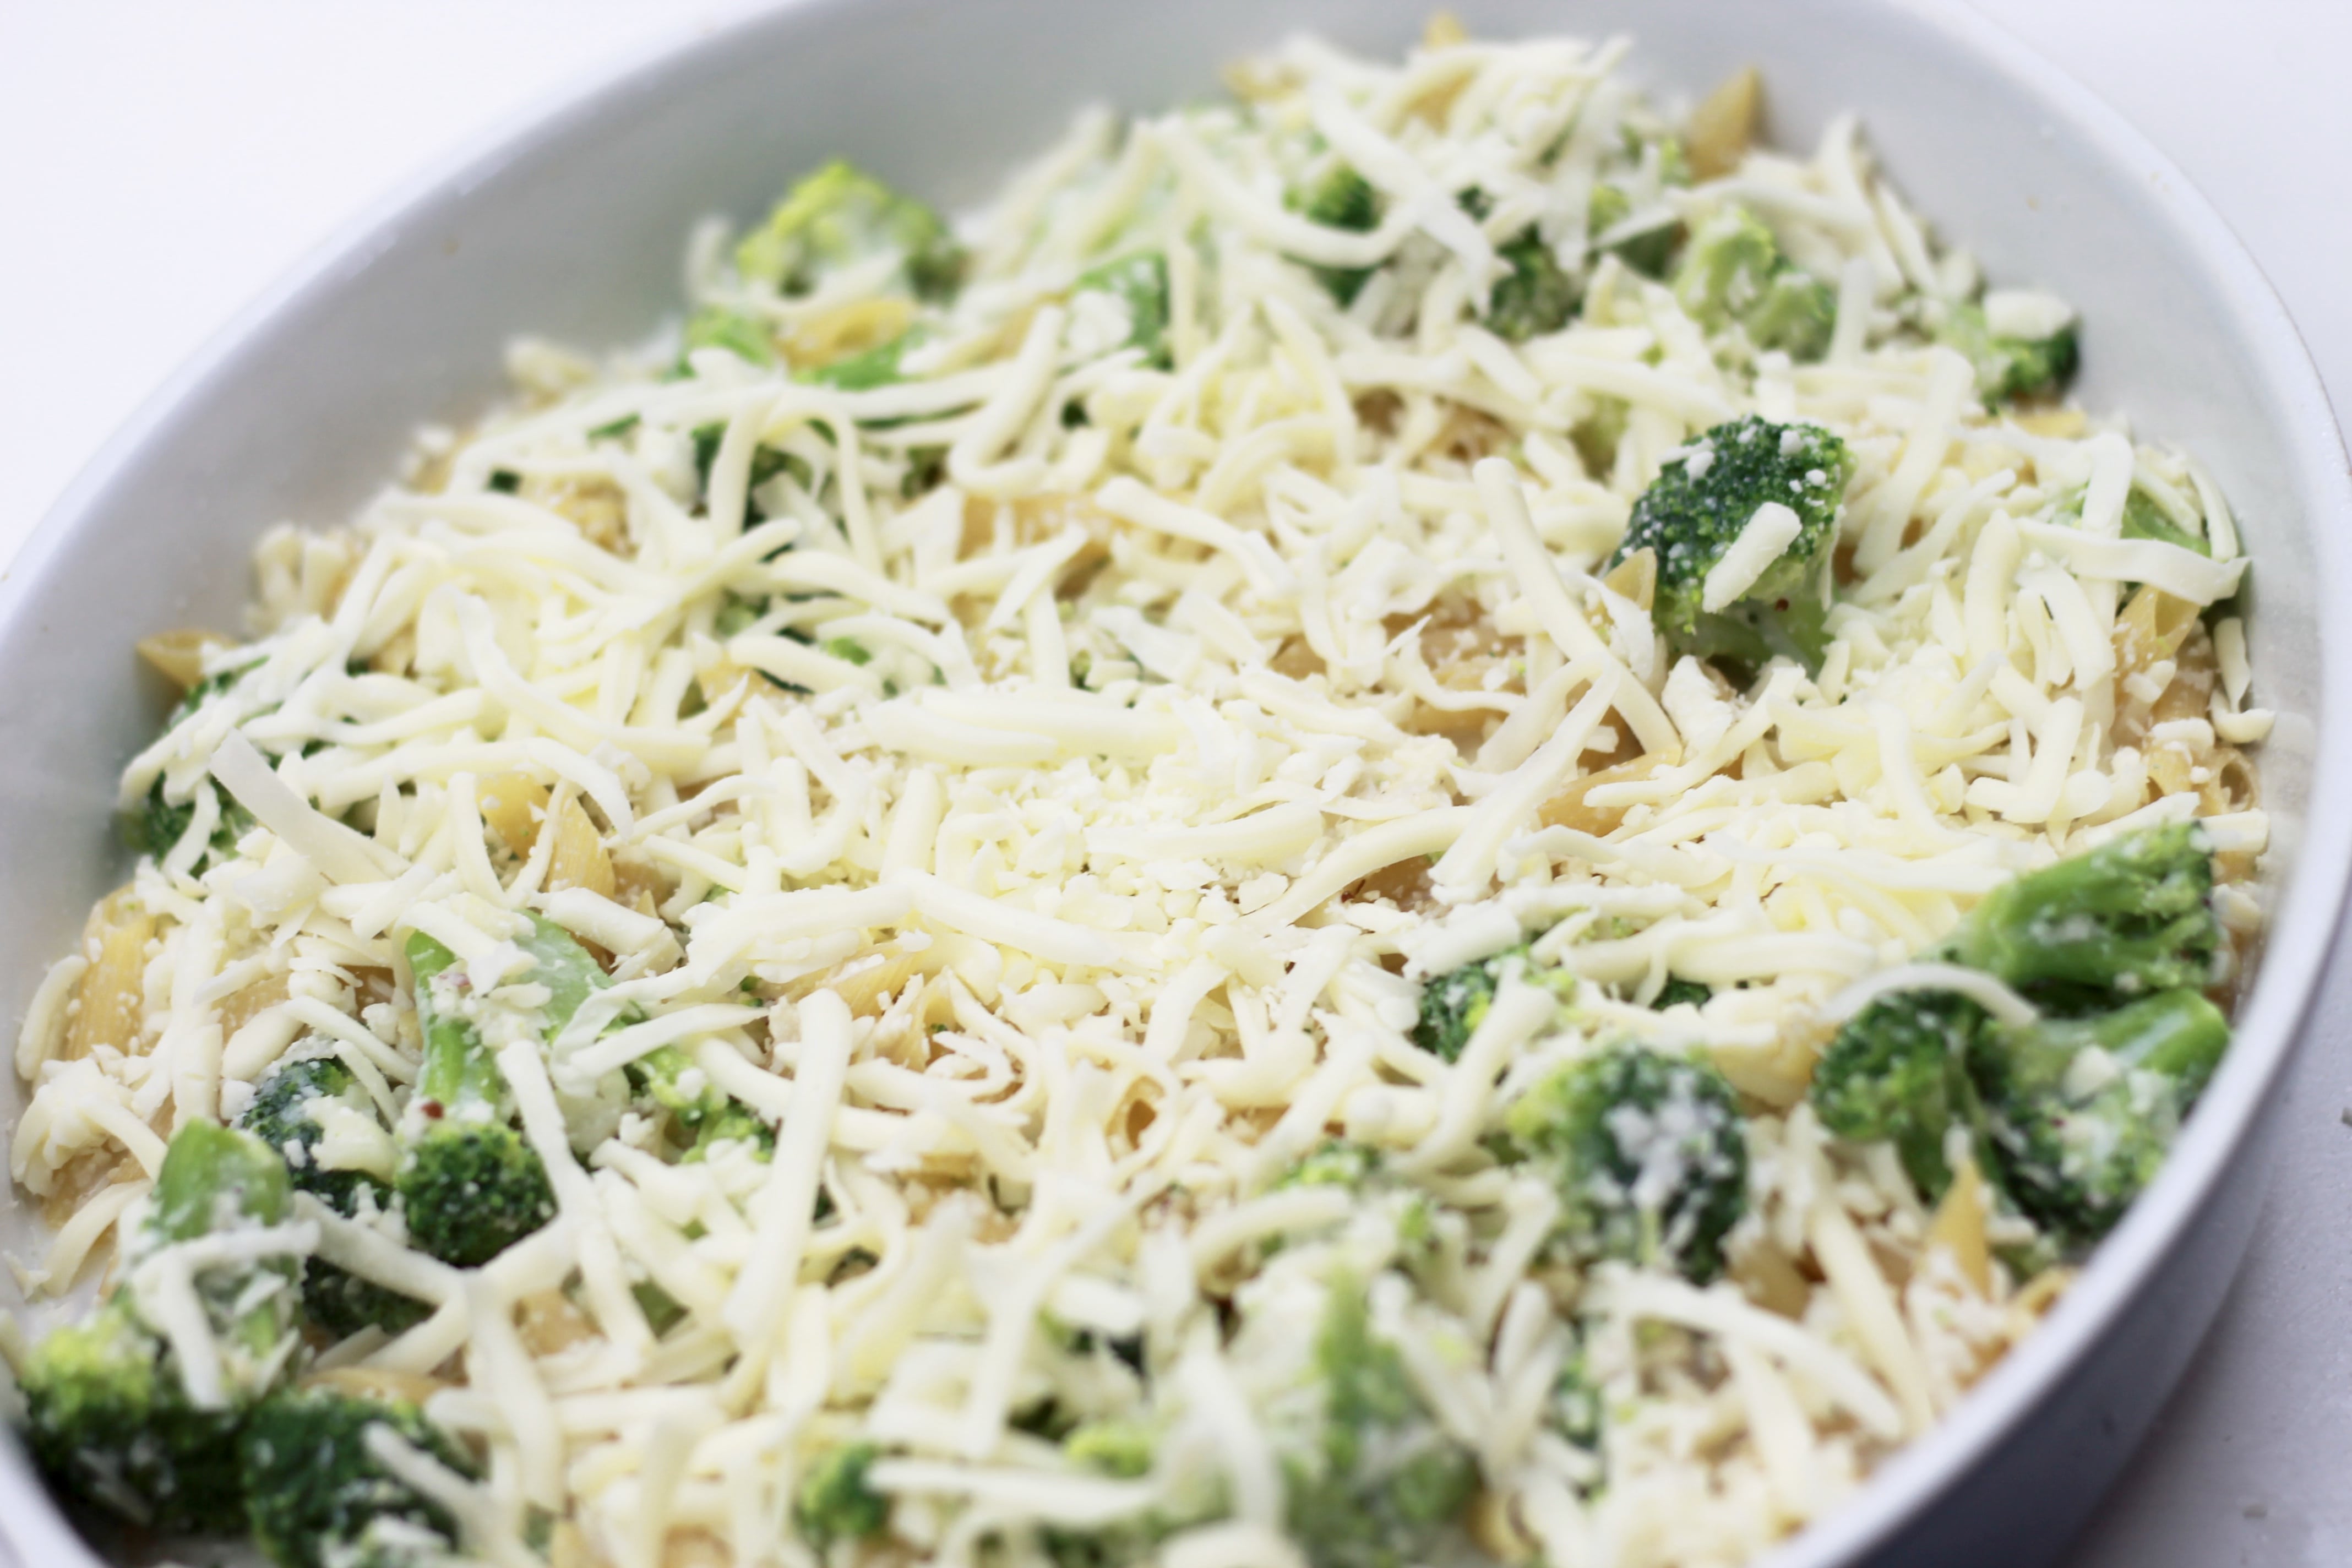 Cooked broccoli, pasta, and shredded cheese in a dish ready to be served topped with more cheese.